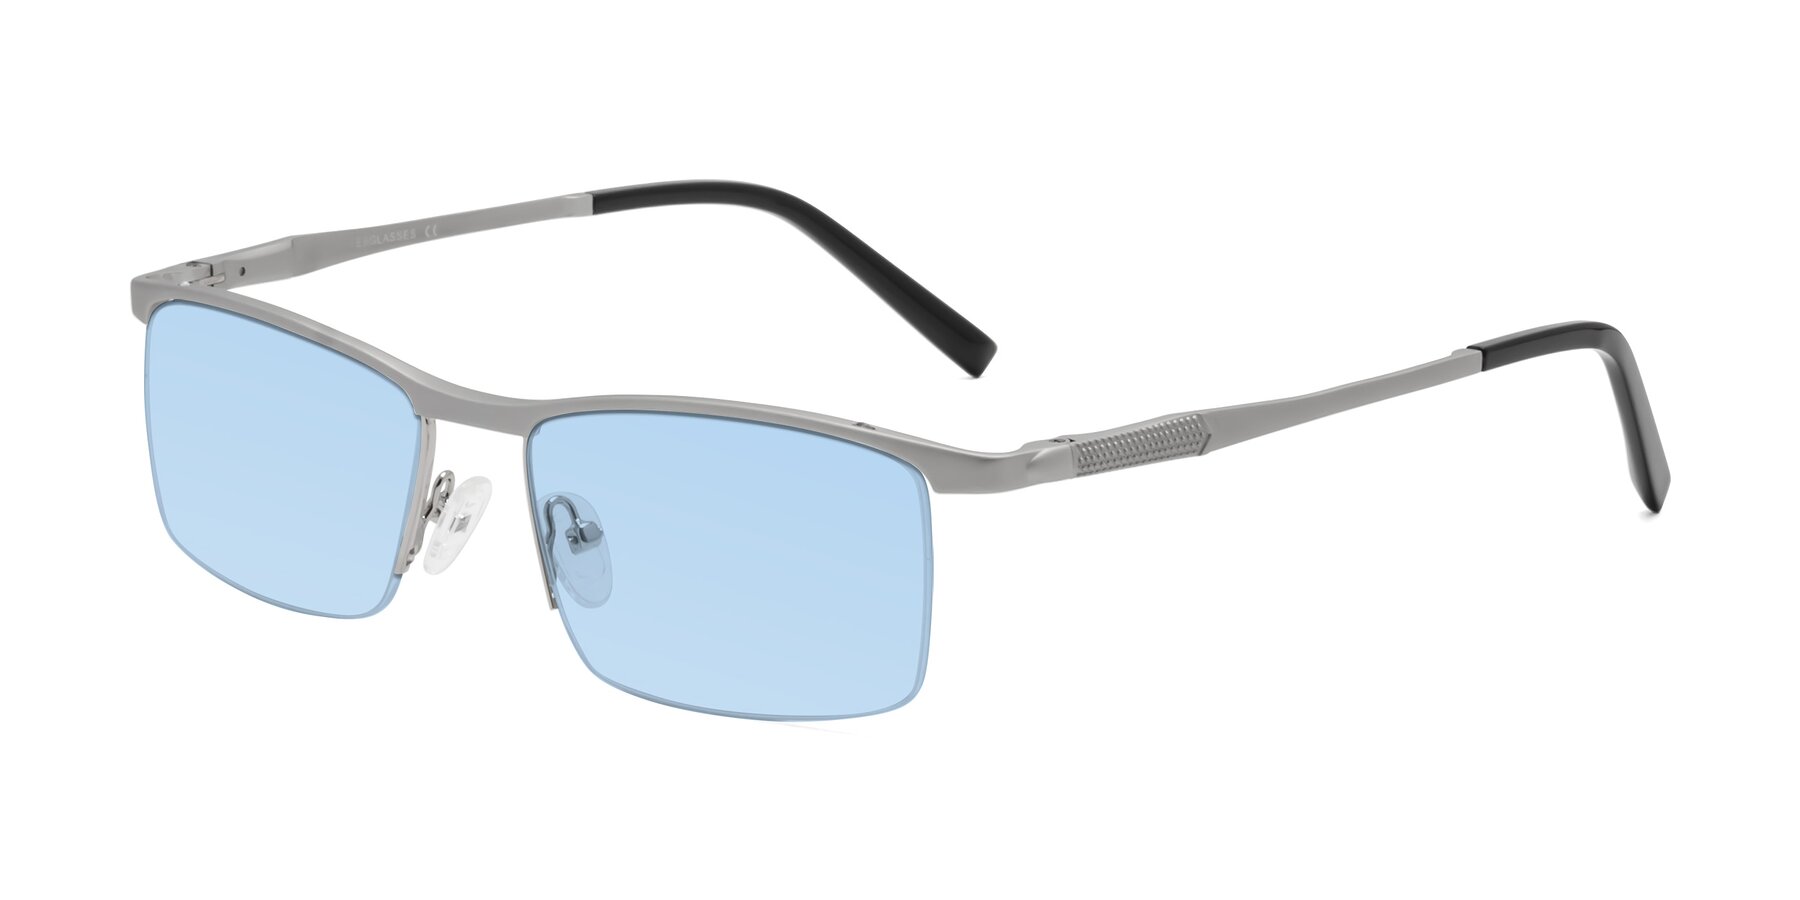 Angle of CX6303 in Silver with Light Blue Tinted Lenses